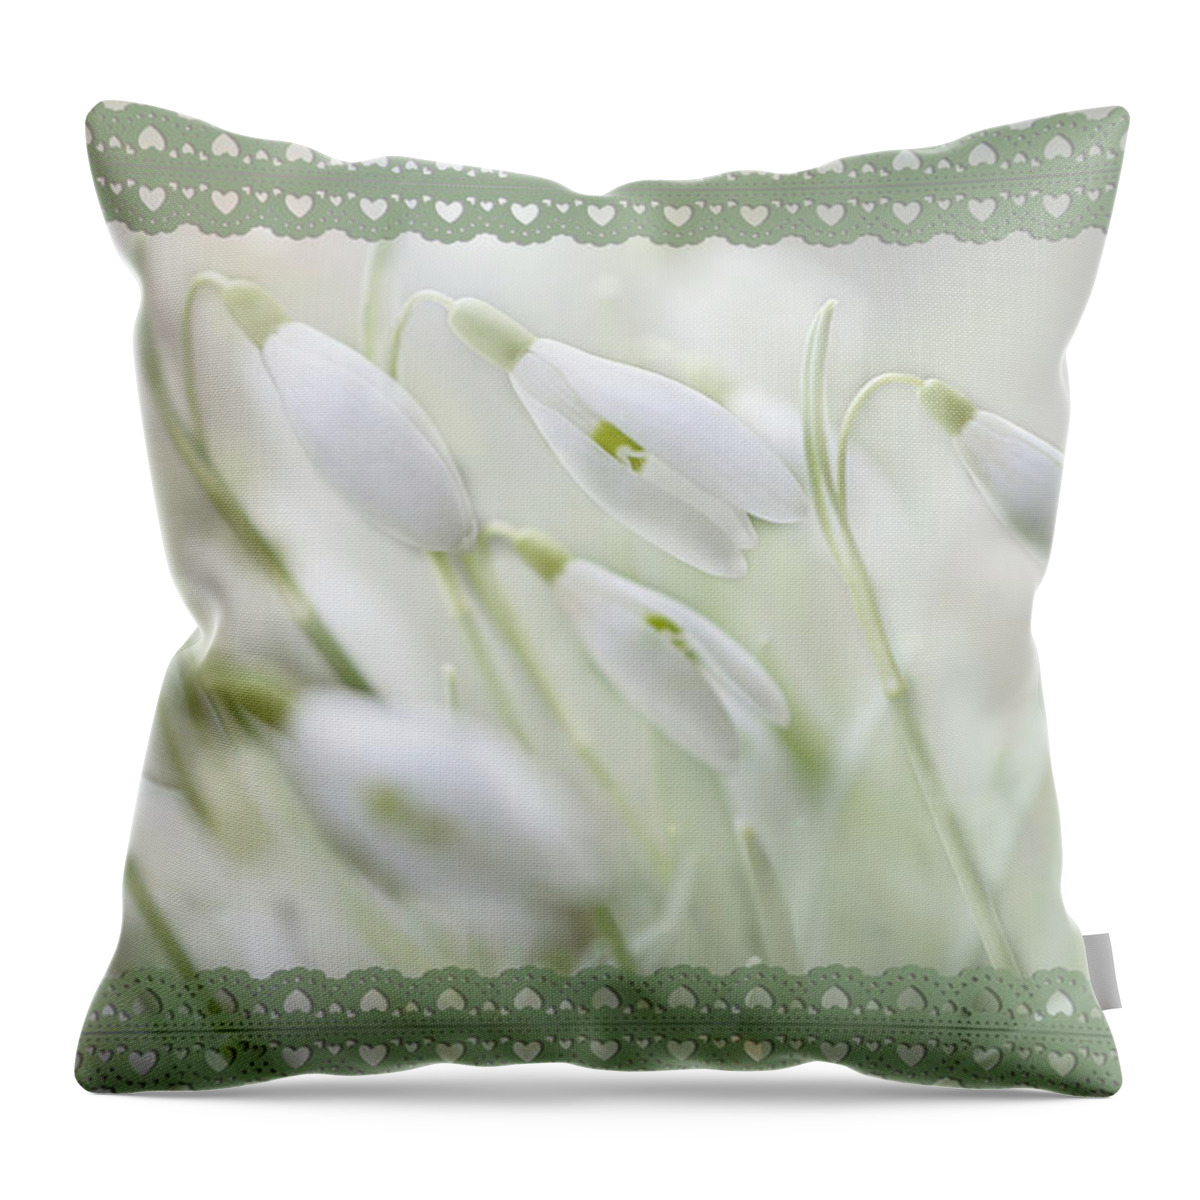 Snowdrop Throw Pillow featuring the drawing Green Lace Snowdrops by Mary J Winters-Meyer